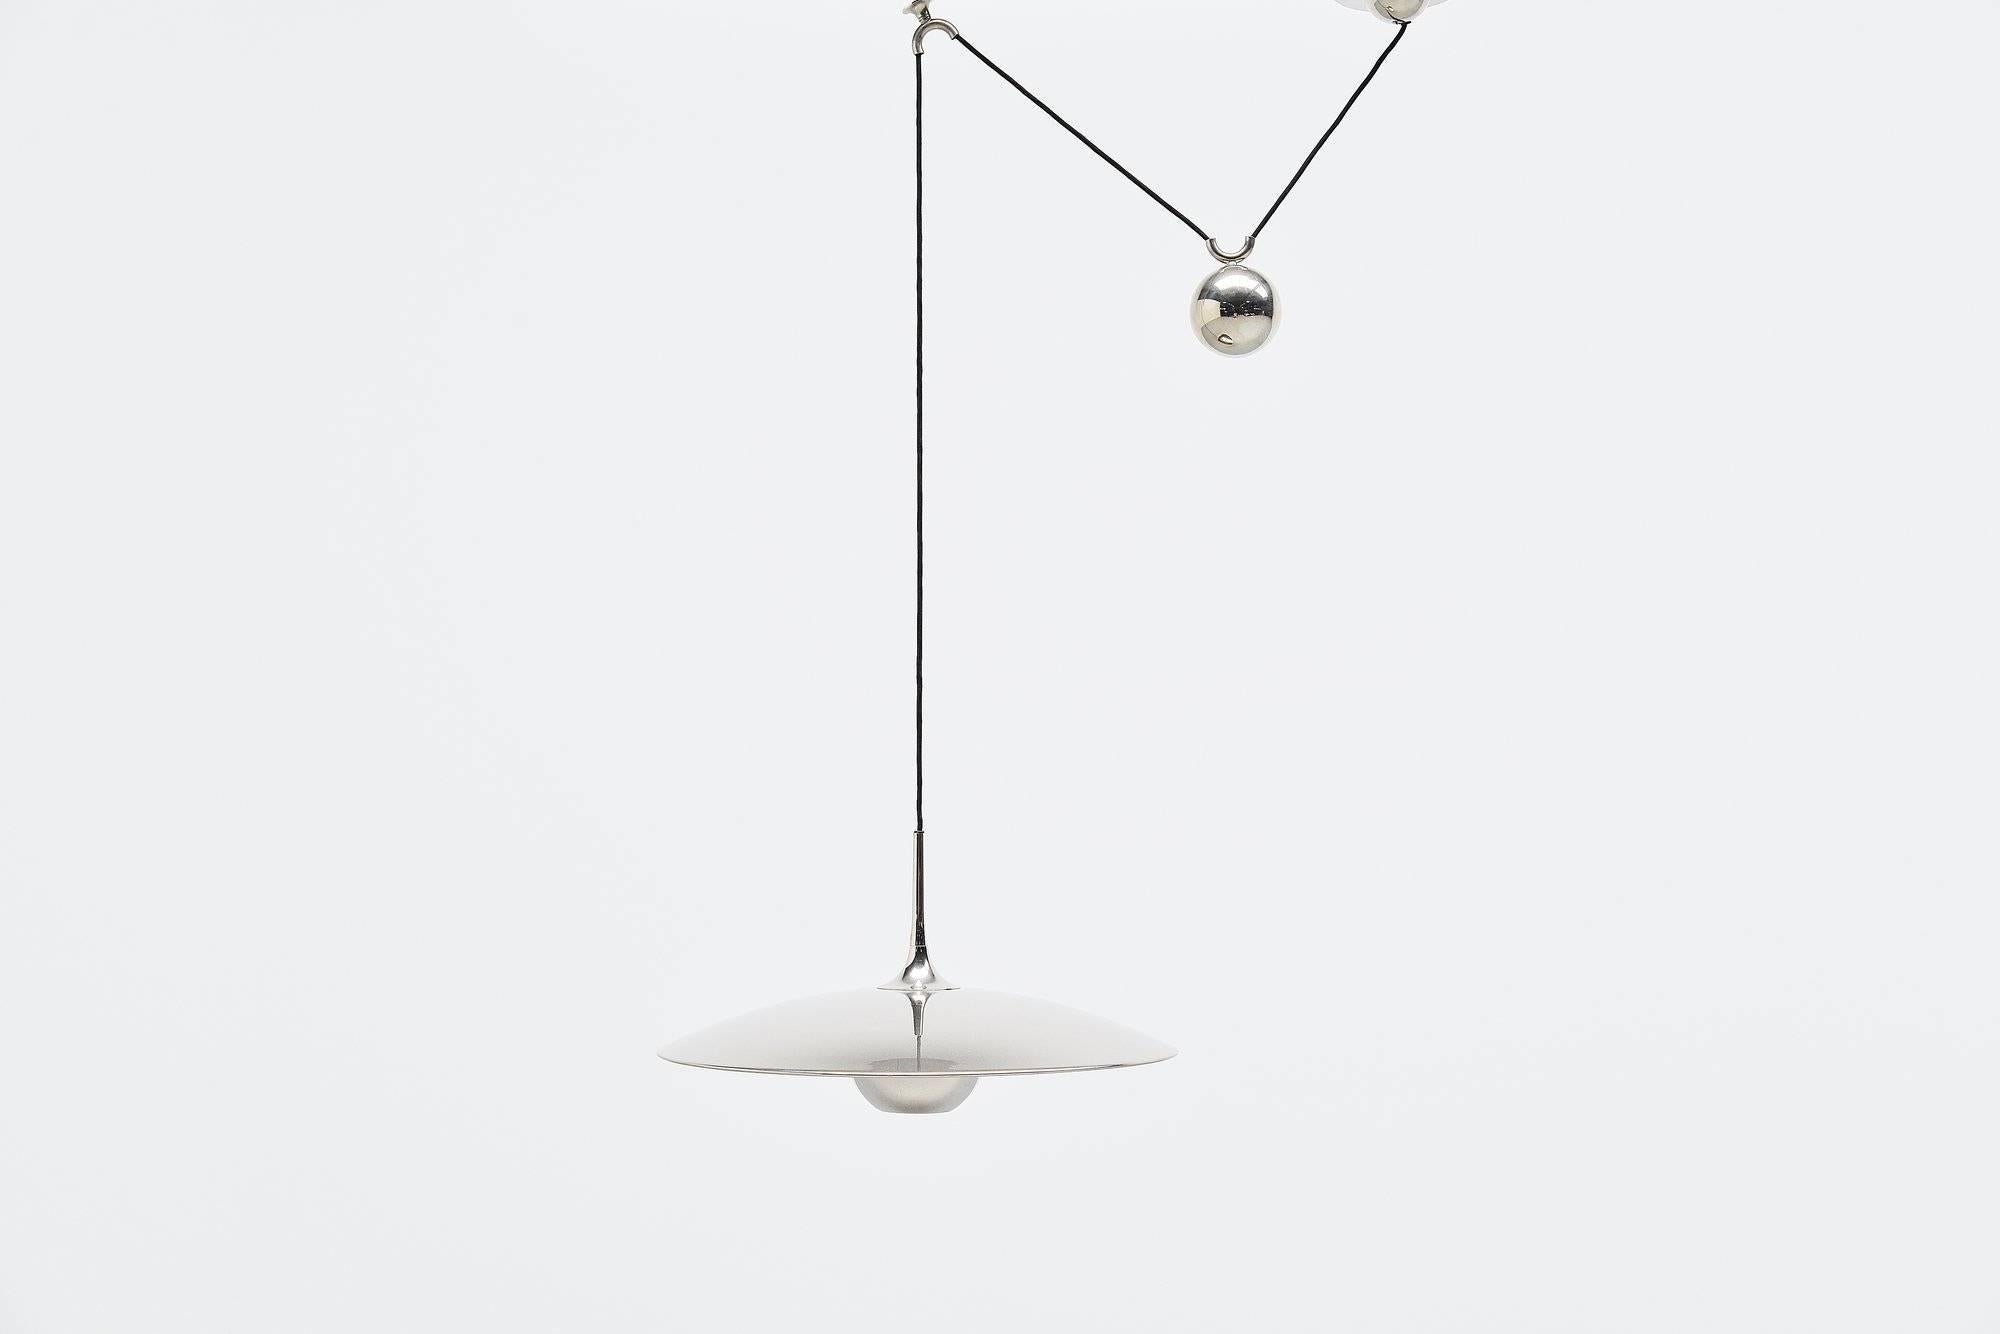 Florian Schulz Onos 55 Pendant Lamp in Chrome, Germany, 1970 1